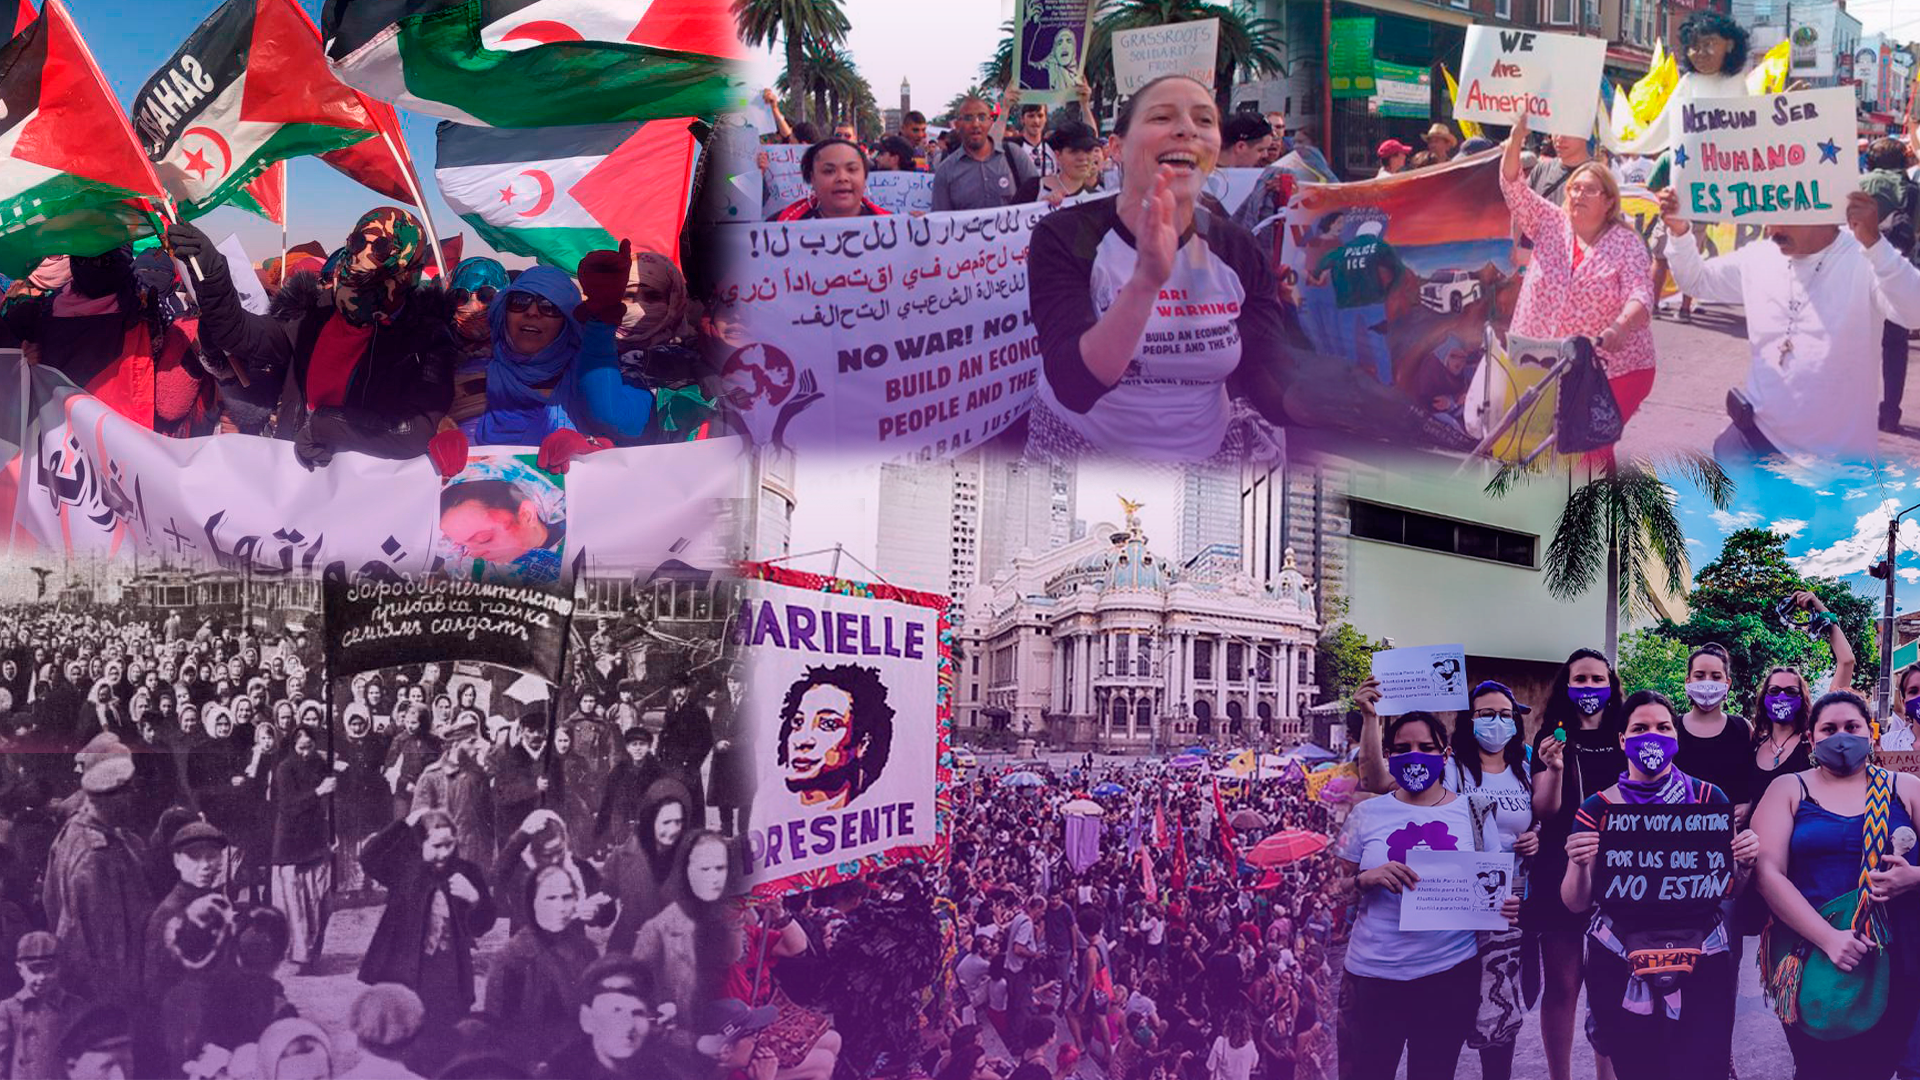 April 24: Feminist Solidarity Against War and the Power of Transnational Corporations